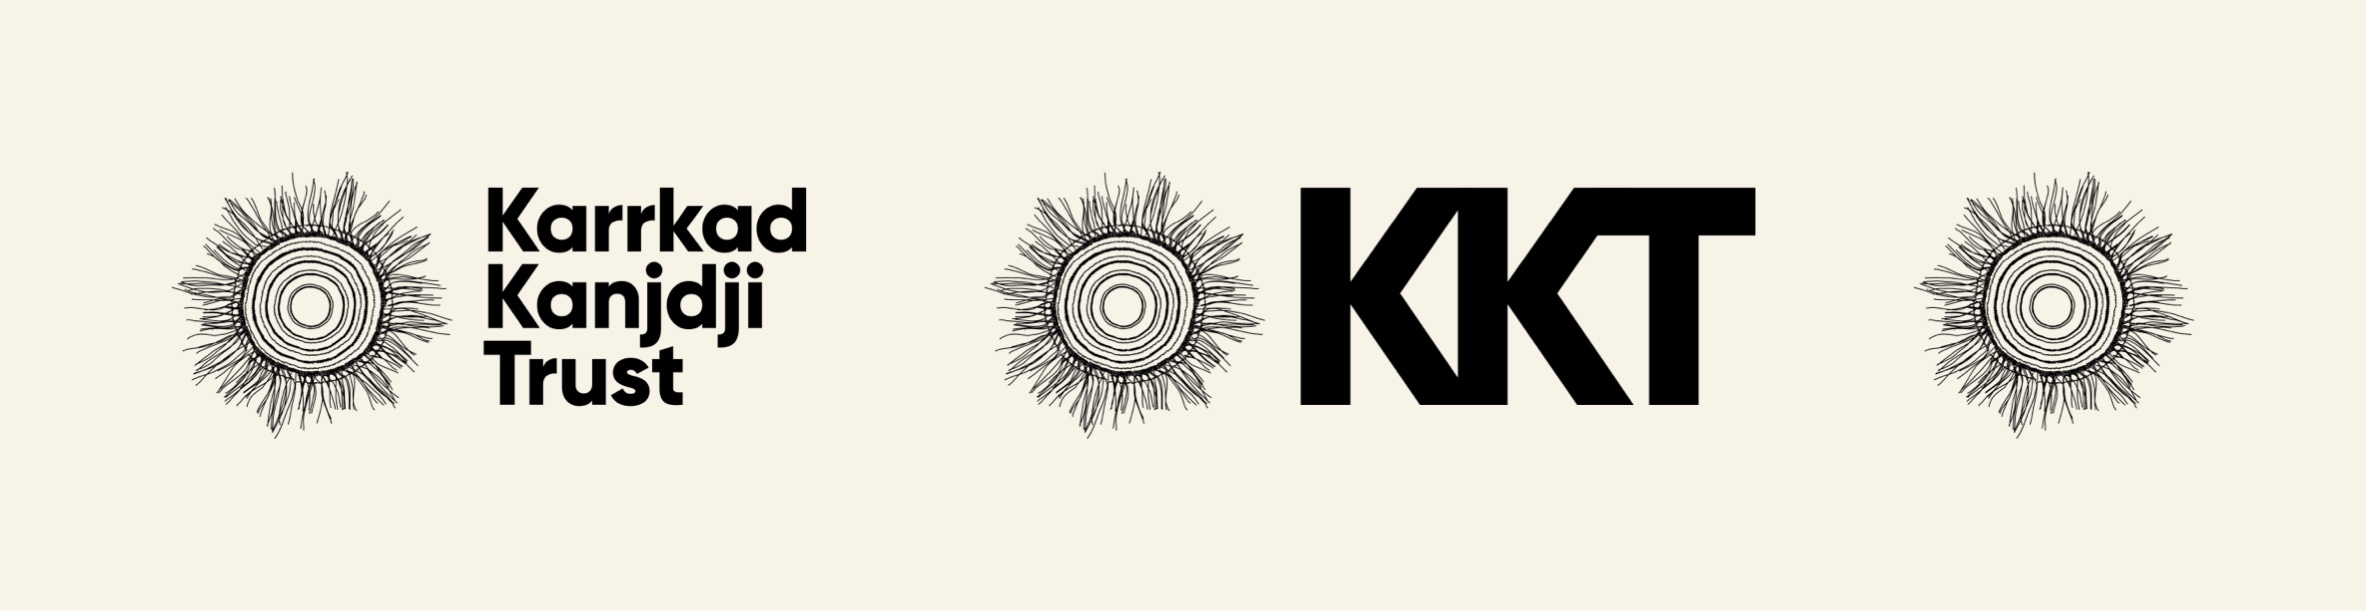 Three KKT logo variations. One features the woven heart with the full brand name, the second features the woven heart and the 'KKT' acronym and the final features the woven heart by itself.